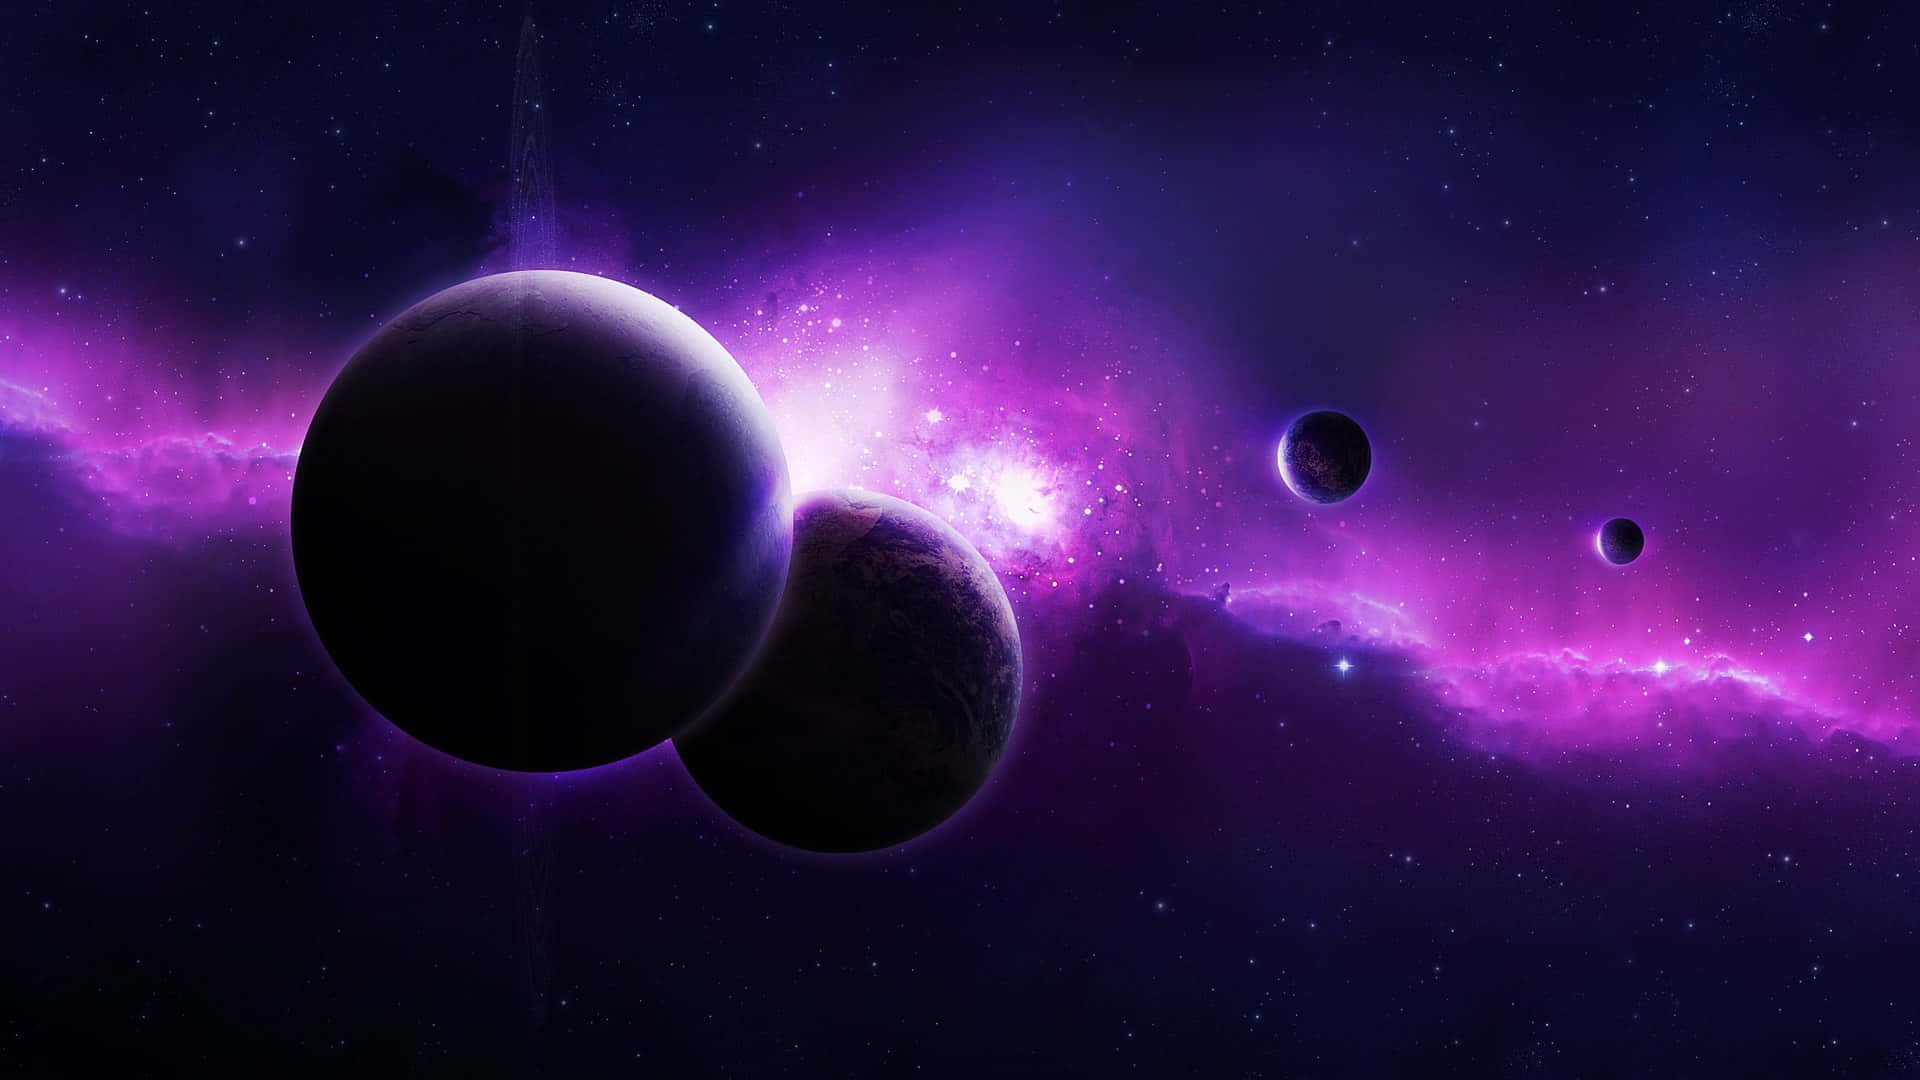 “Dark and Dreamy: A stunning shot of the Black and Purple Galaxy in space.” Wallpaper